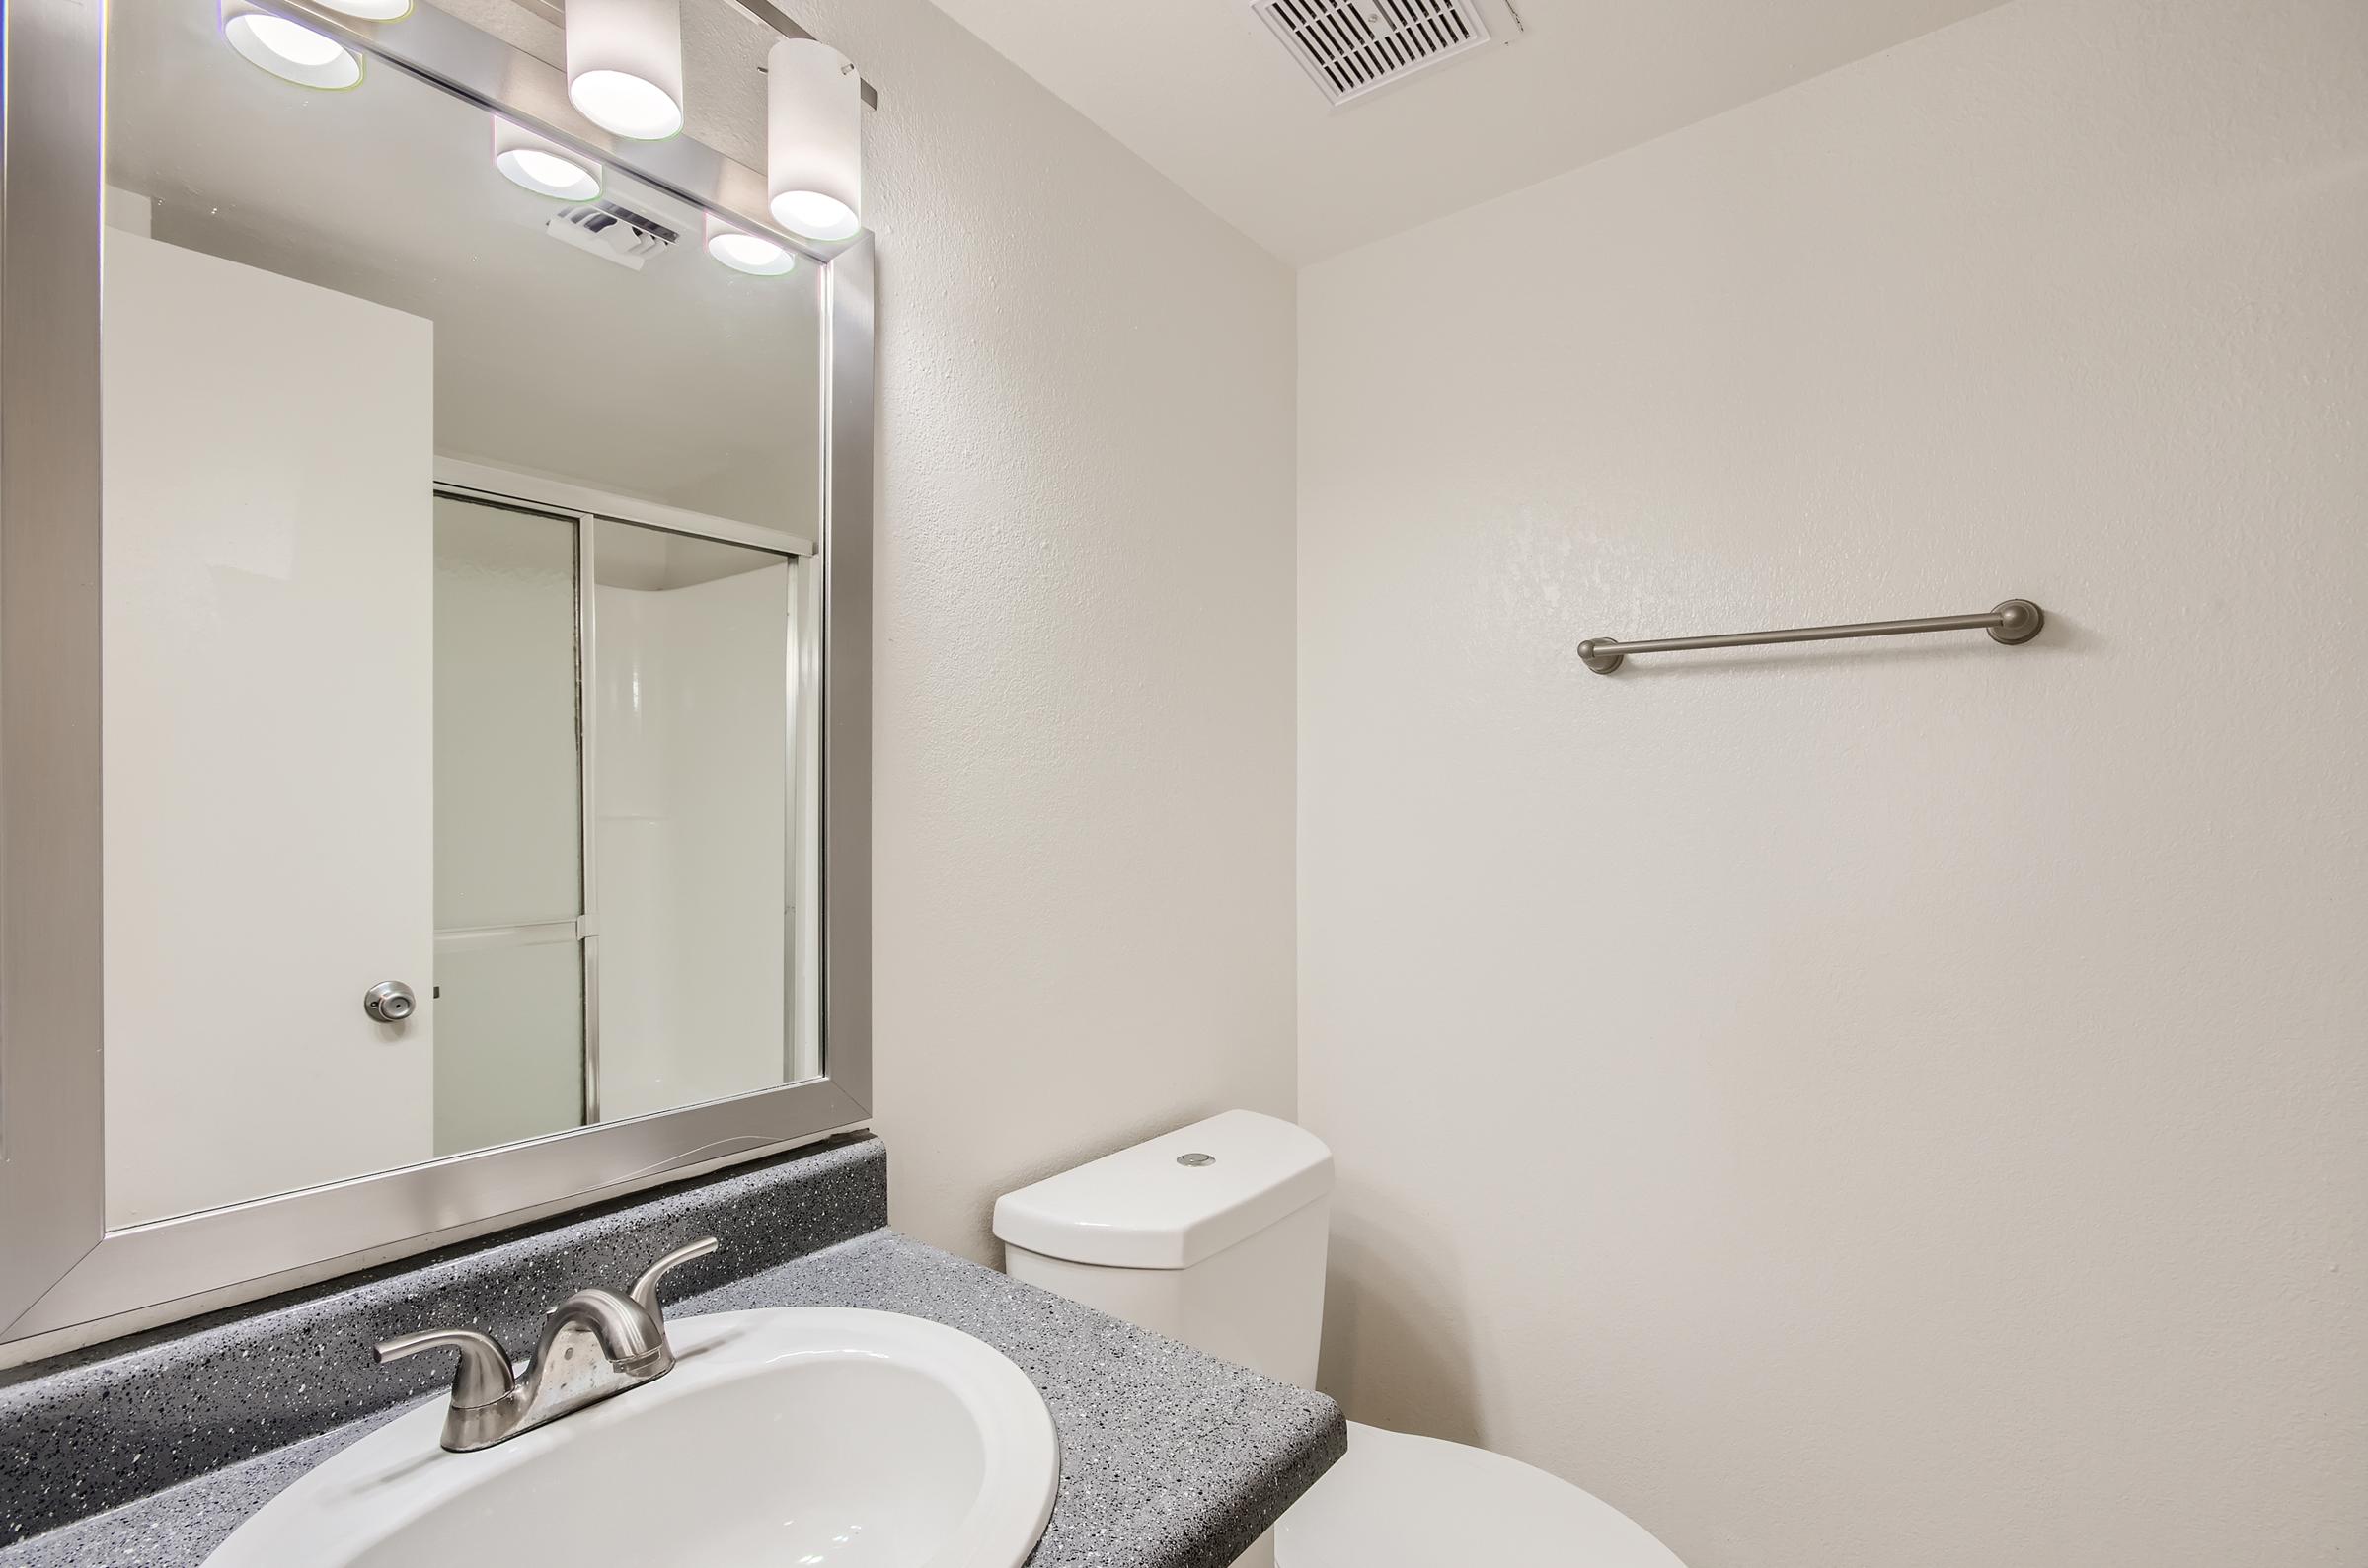 An apartment bathroom with a glass door shower at Rise on McClintock in Tempe, AZ.